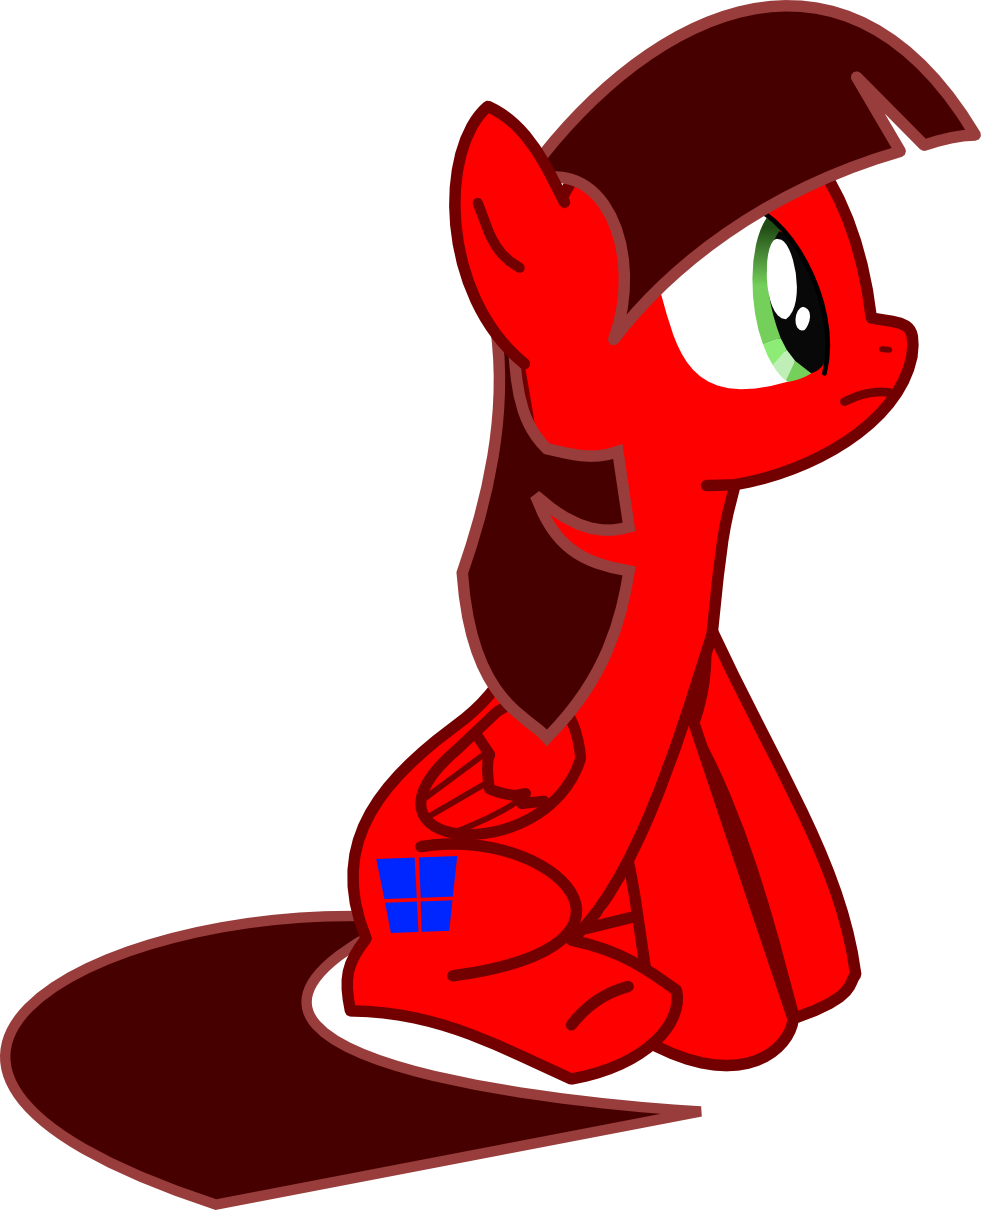 A red horse is peering to the right of her. It's very obvious her cutie mark is just the Windows 8 logo.